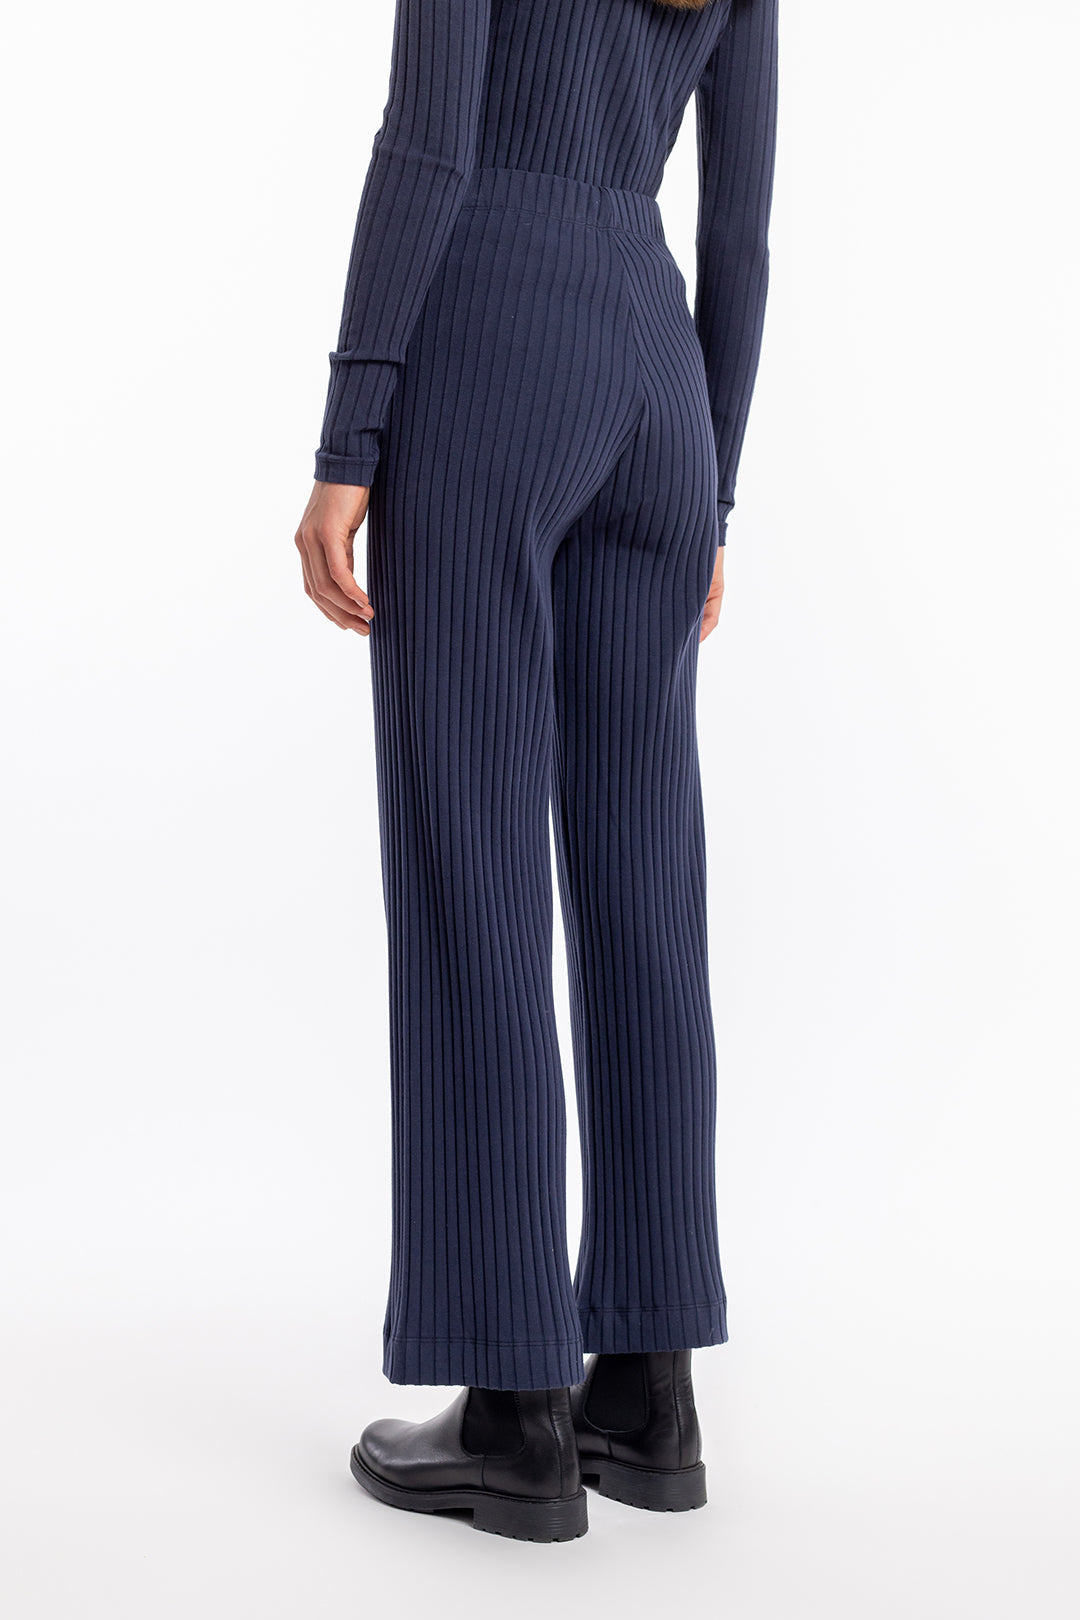 Dark blue, ribbed trousers made of organic cotton from Rotholz